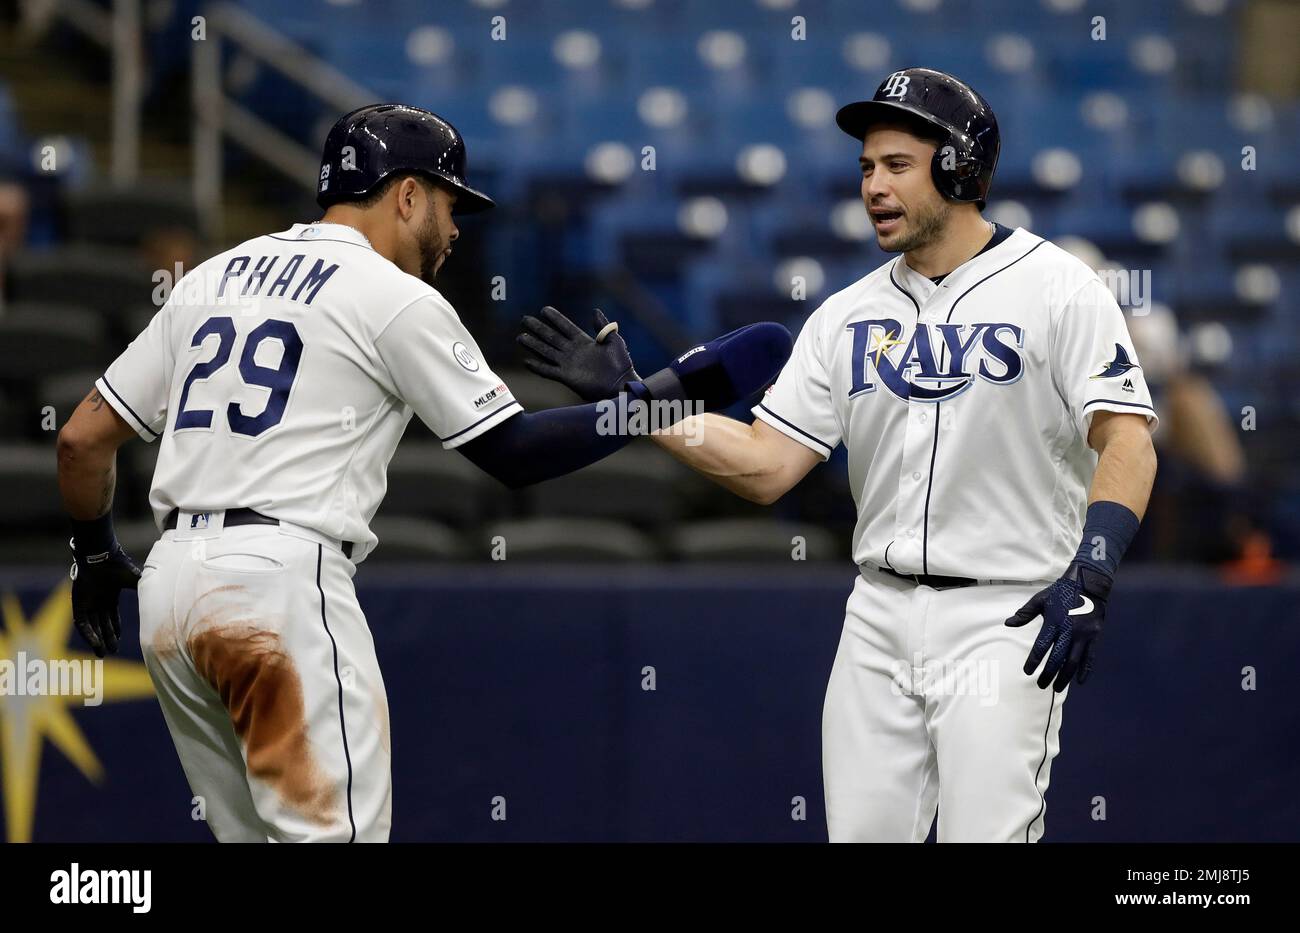 Tampa Bay Rays' Travis d'Arnaud, right, celebrates with Tommy Pham